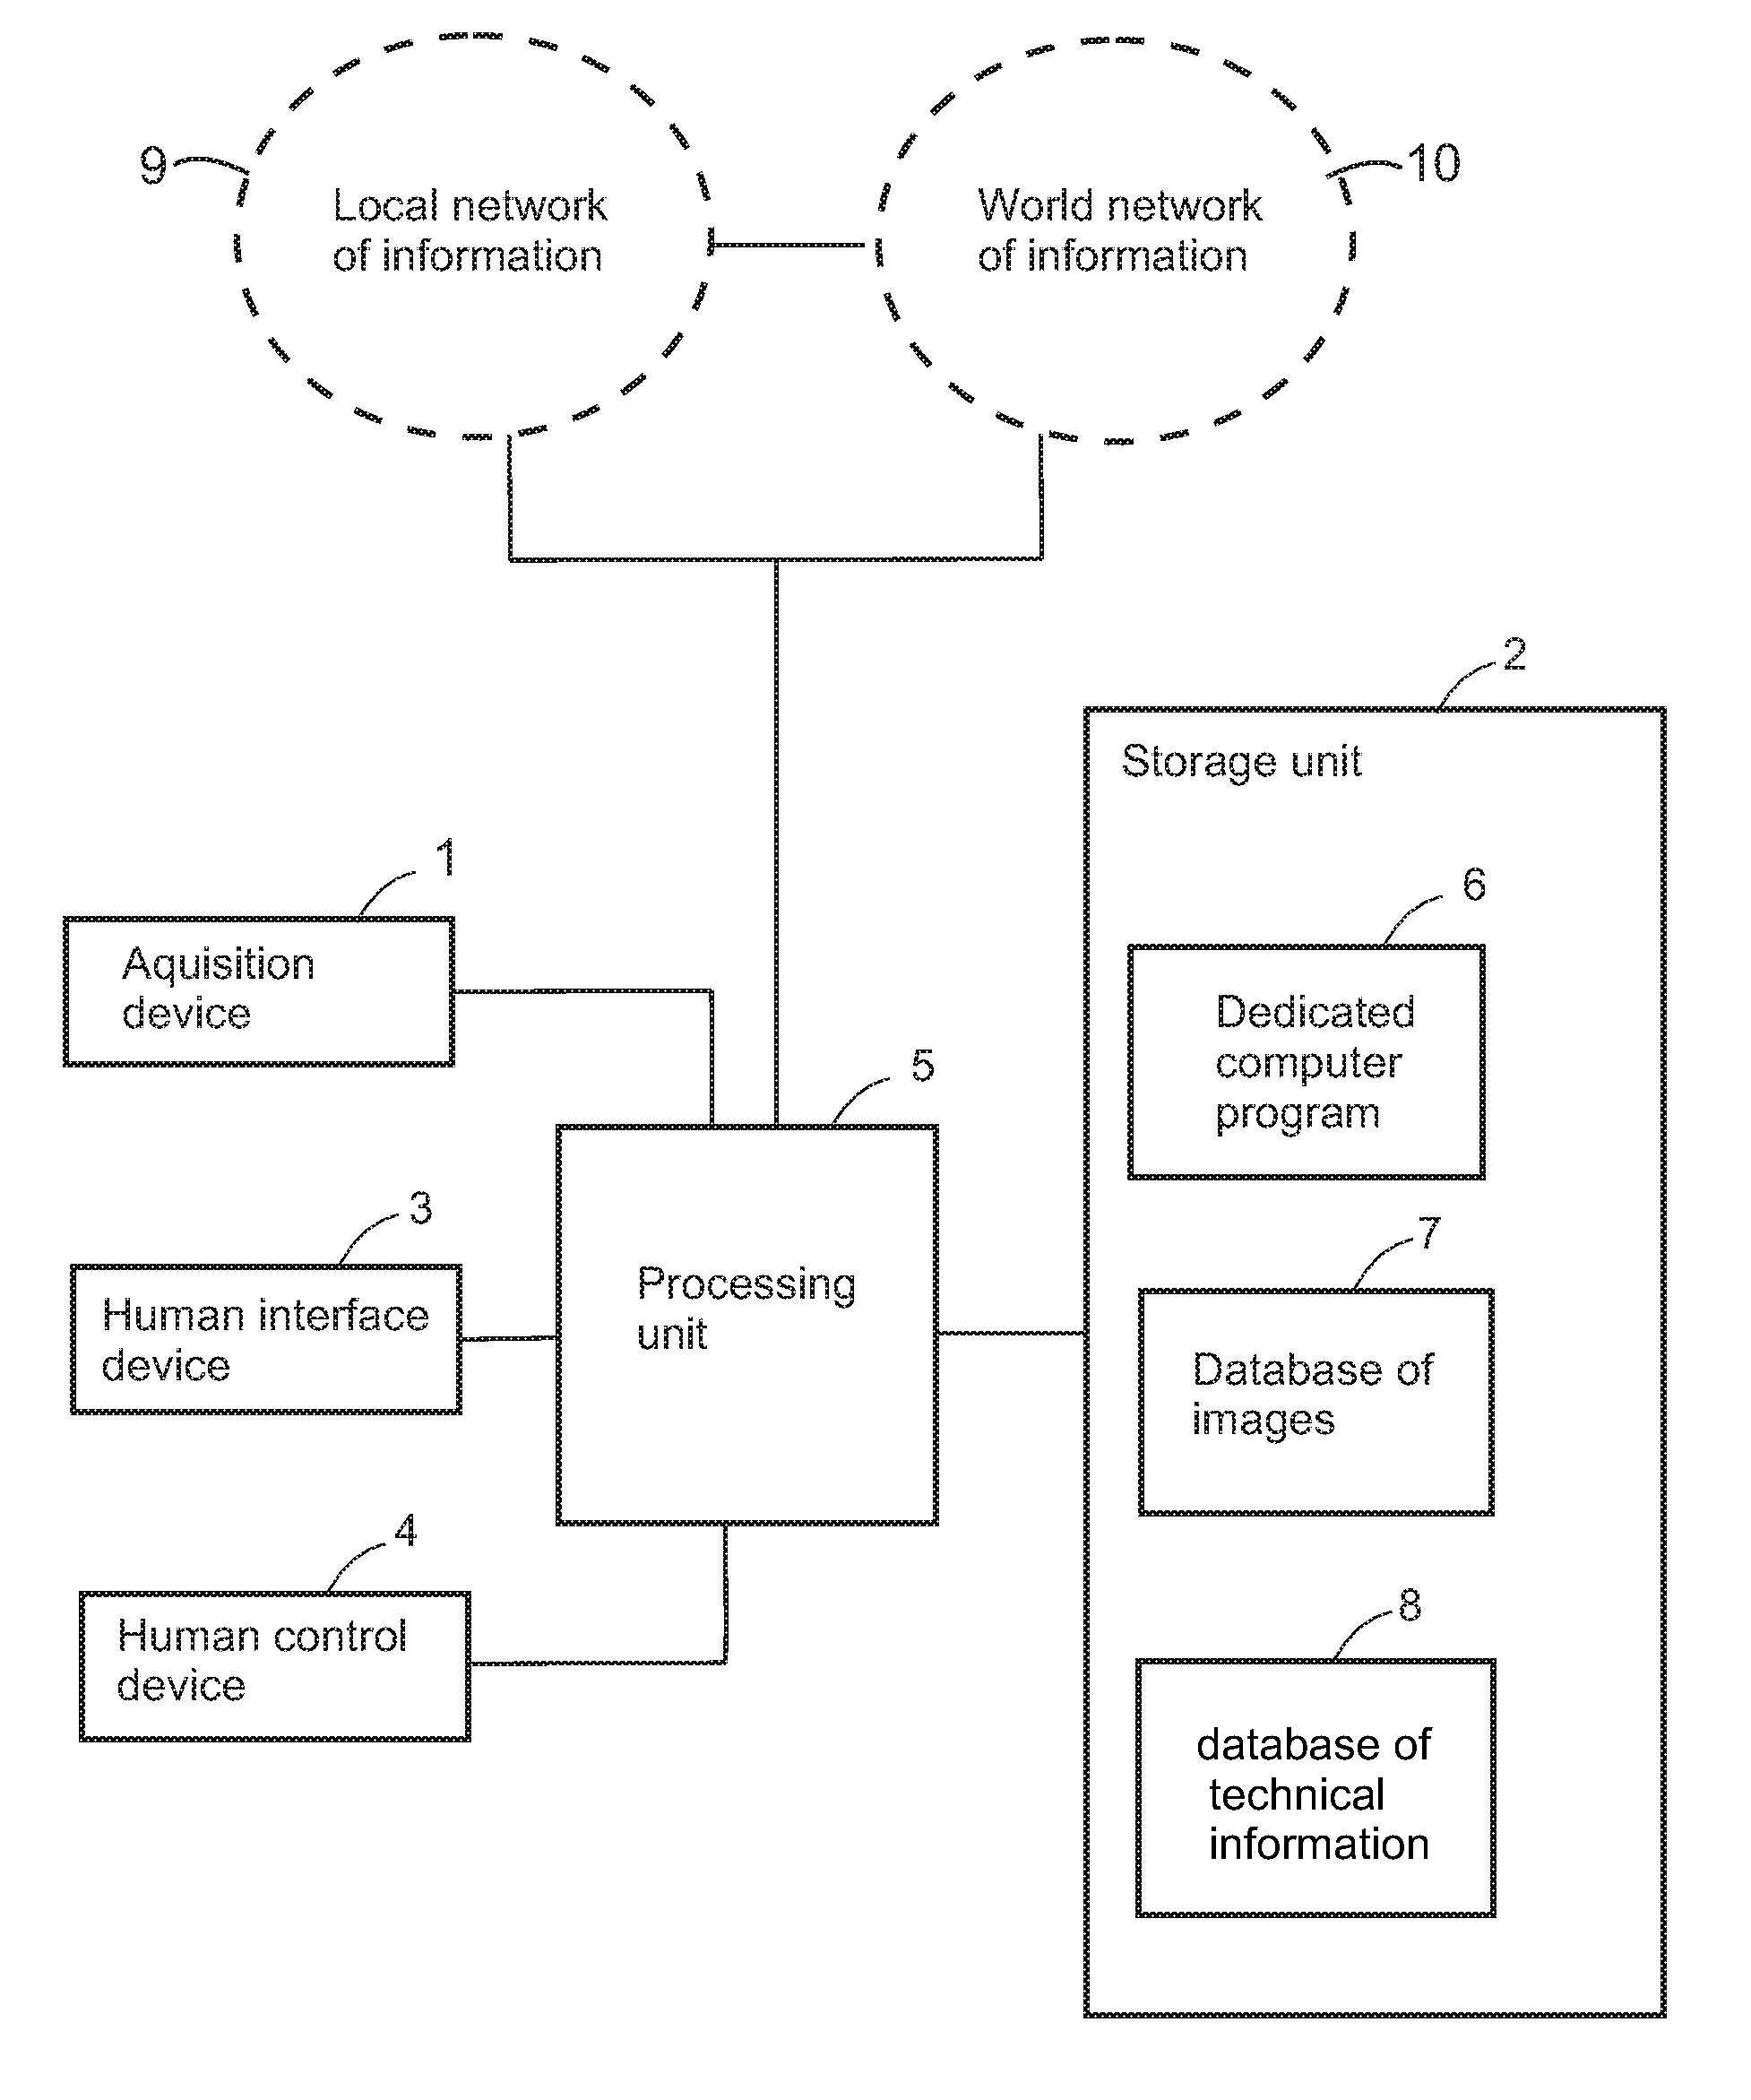 System for diagnosis of plant anomalies